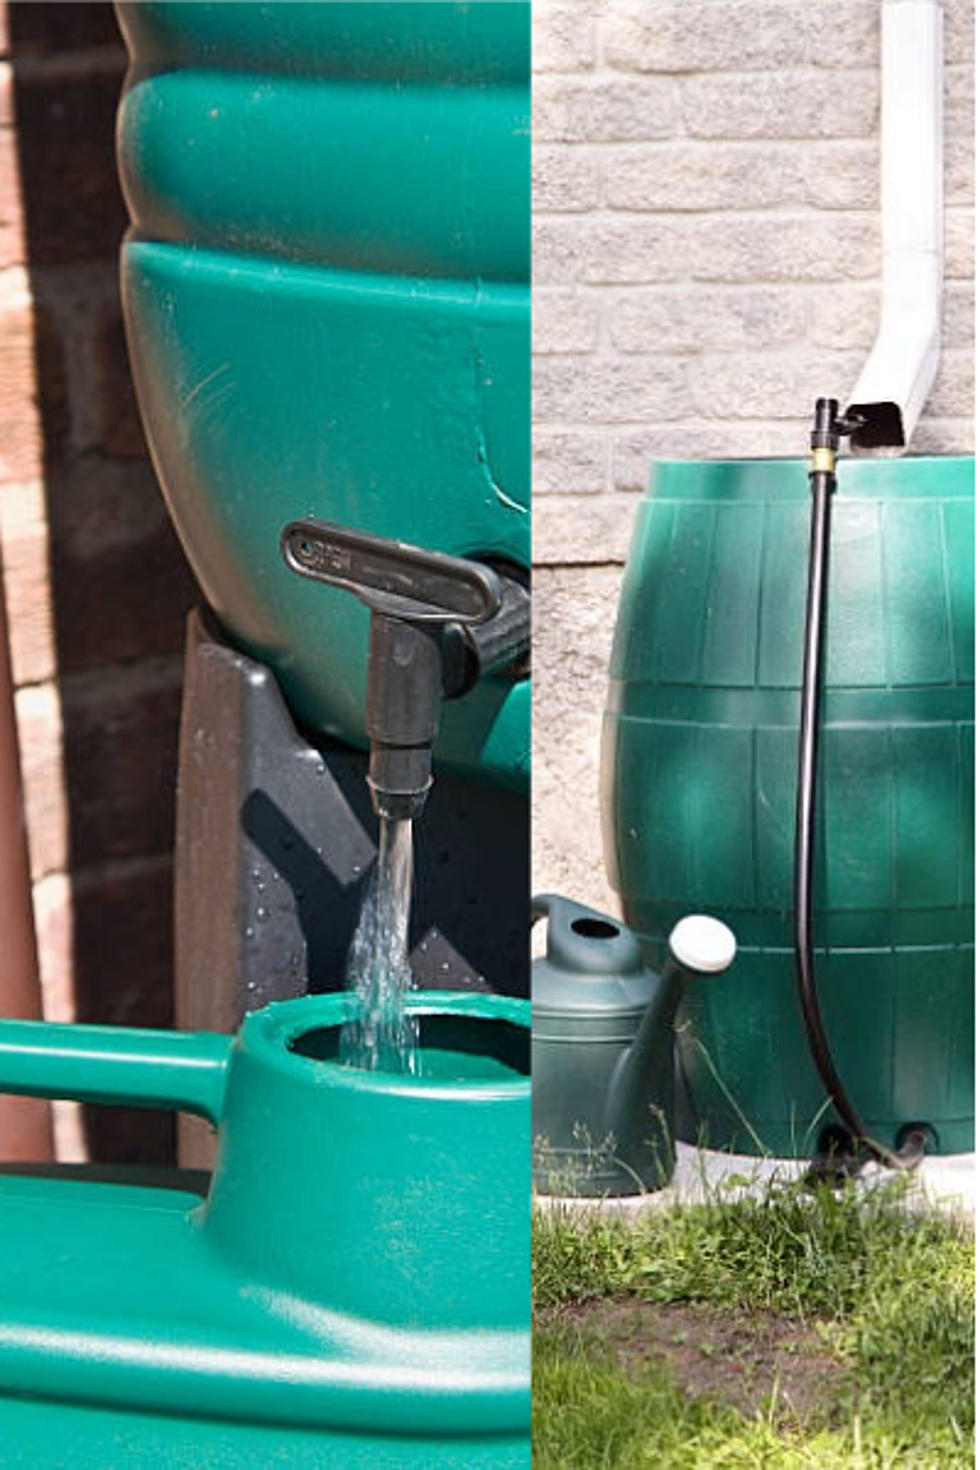 Is It Illegal To Collect And Save Rainwater In Massachusetts?